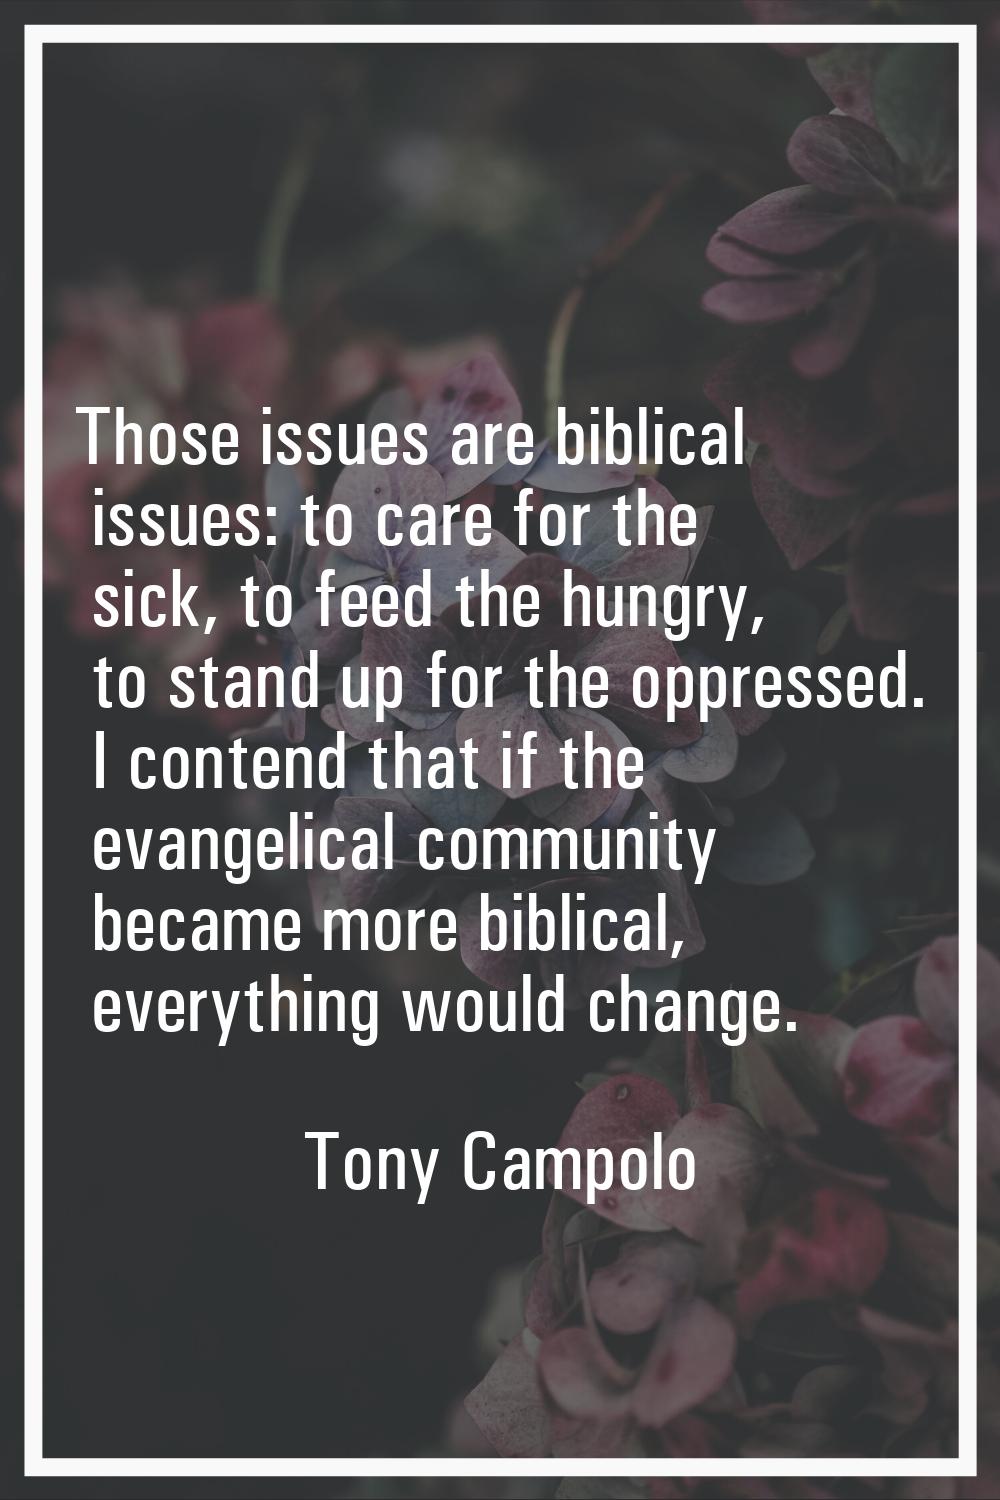 Those issues are biblical issues: to care for the sick, to feed the hungry, to stand up for the opp